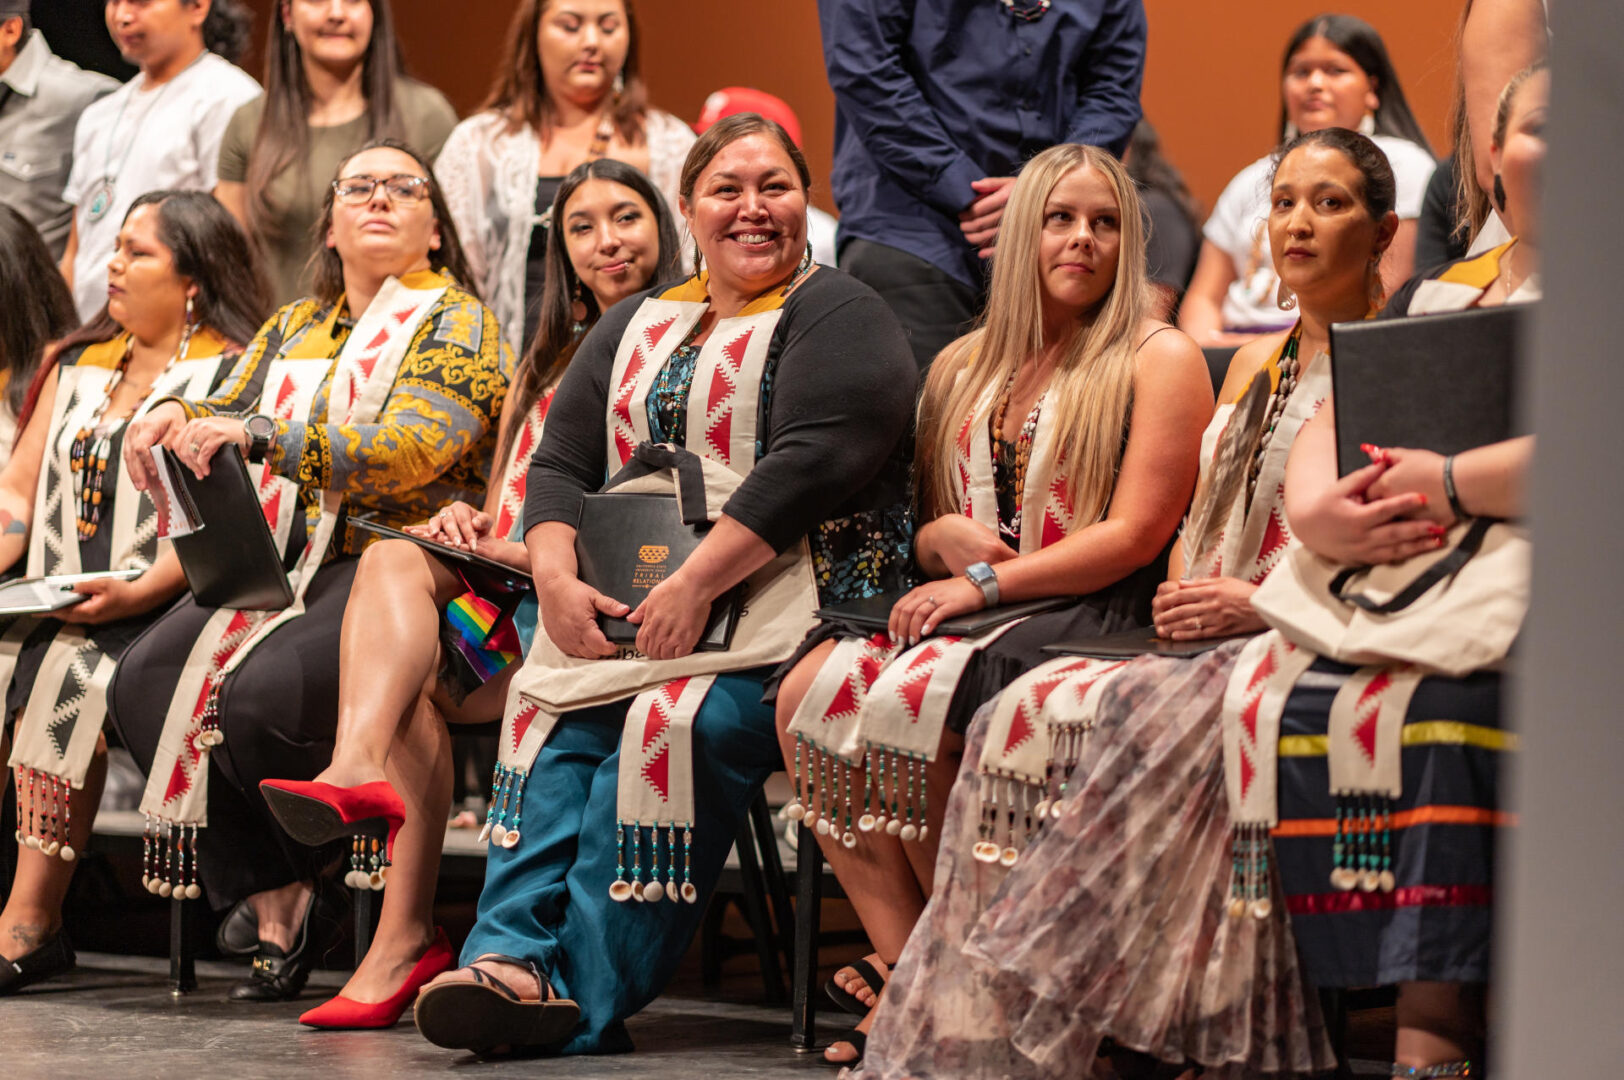 Several Indigenous students sit in chairs smiling during a college graduation